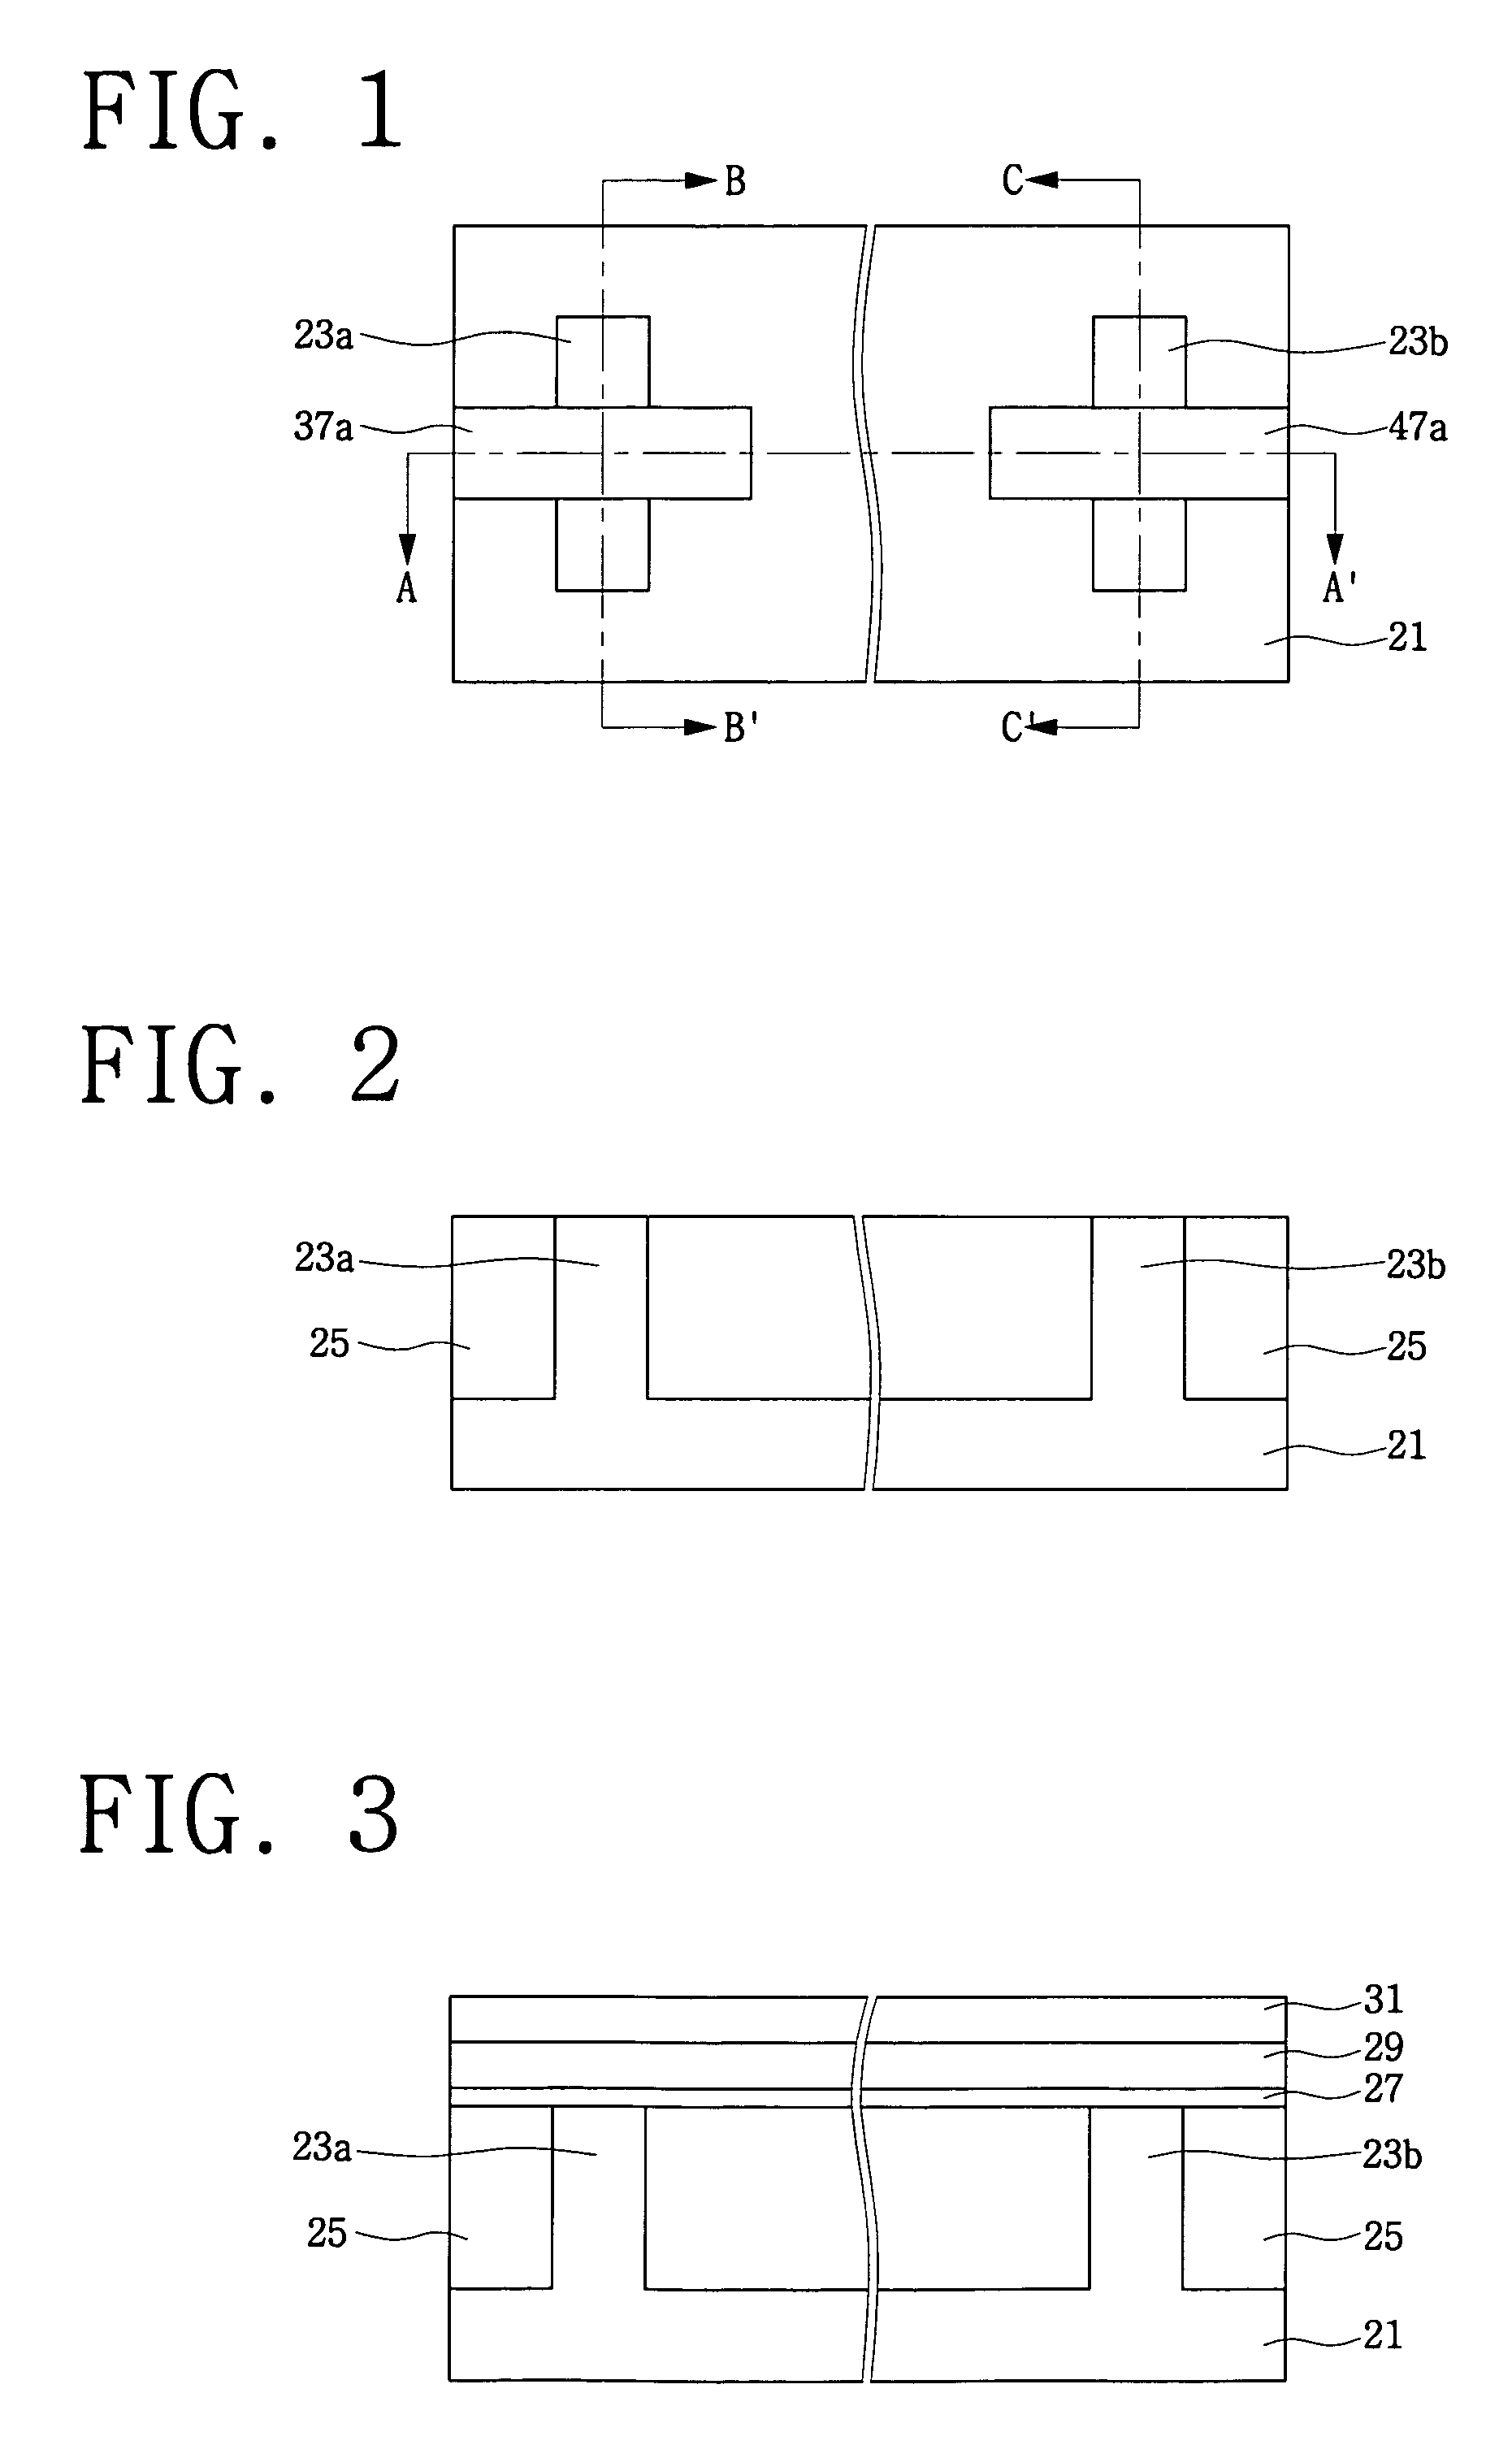 Methods of forming complementary metal oxide semiconductor (CMOS) transistors having three-dimensional channel regions therein